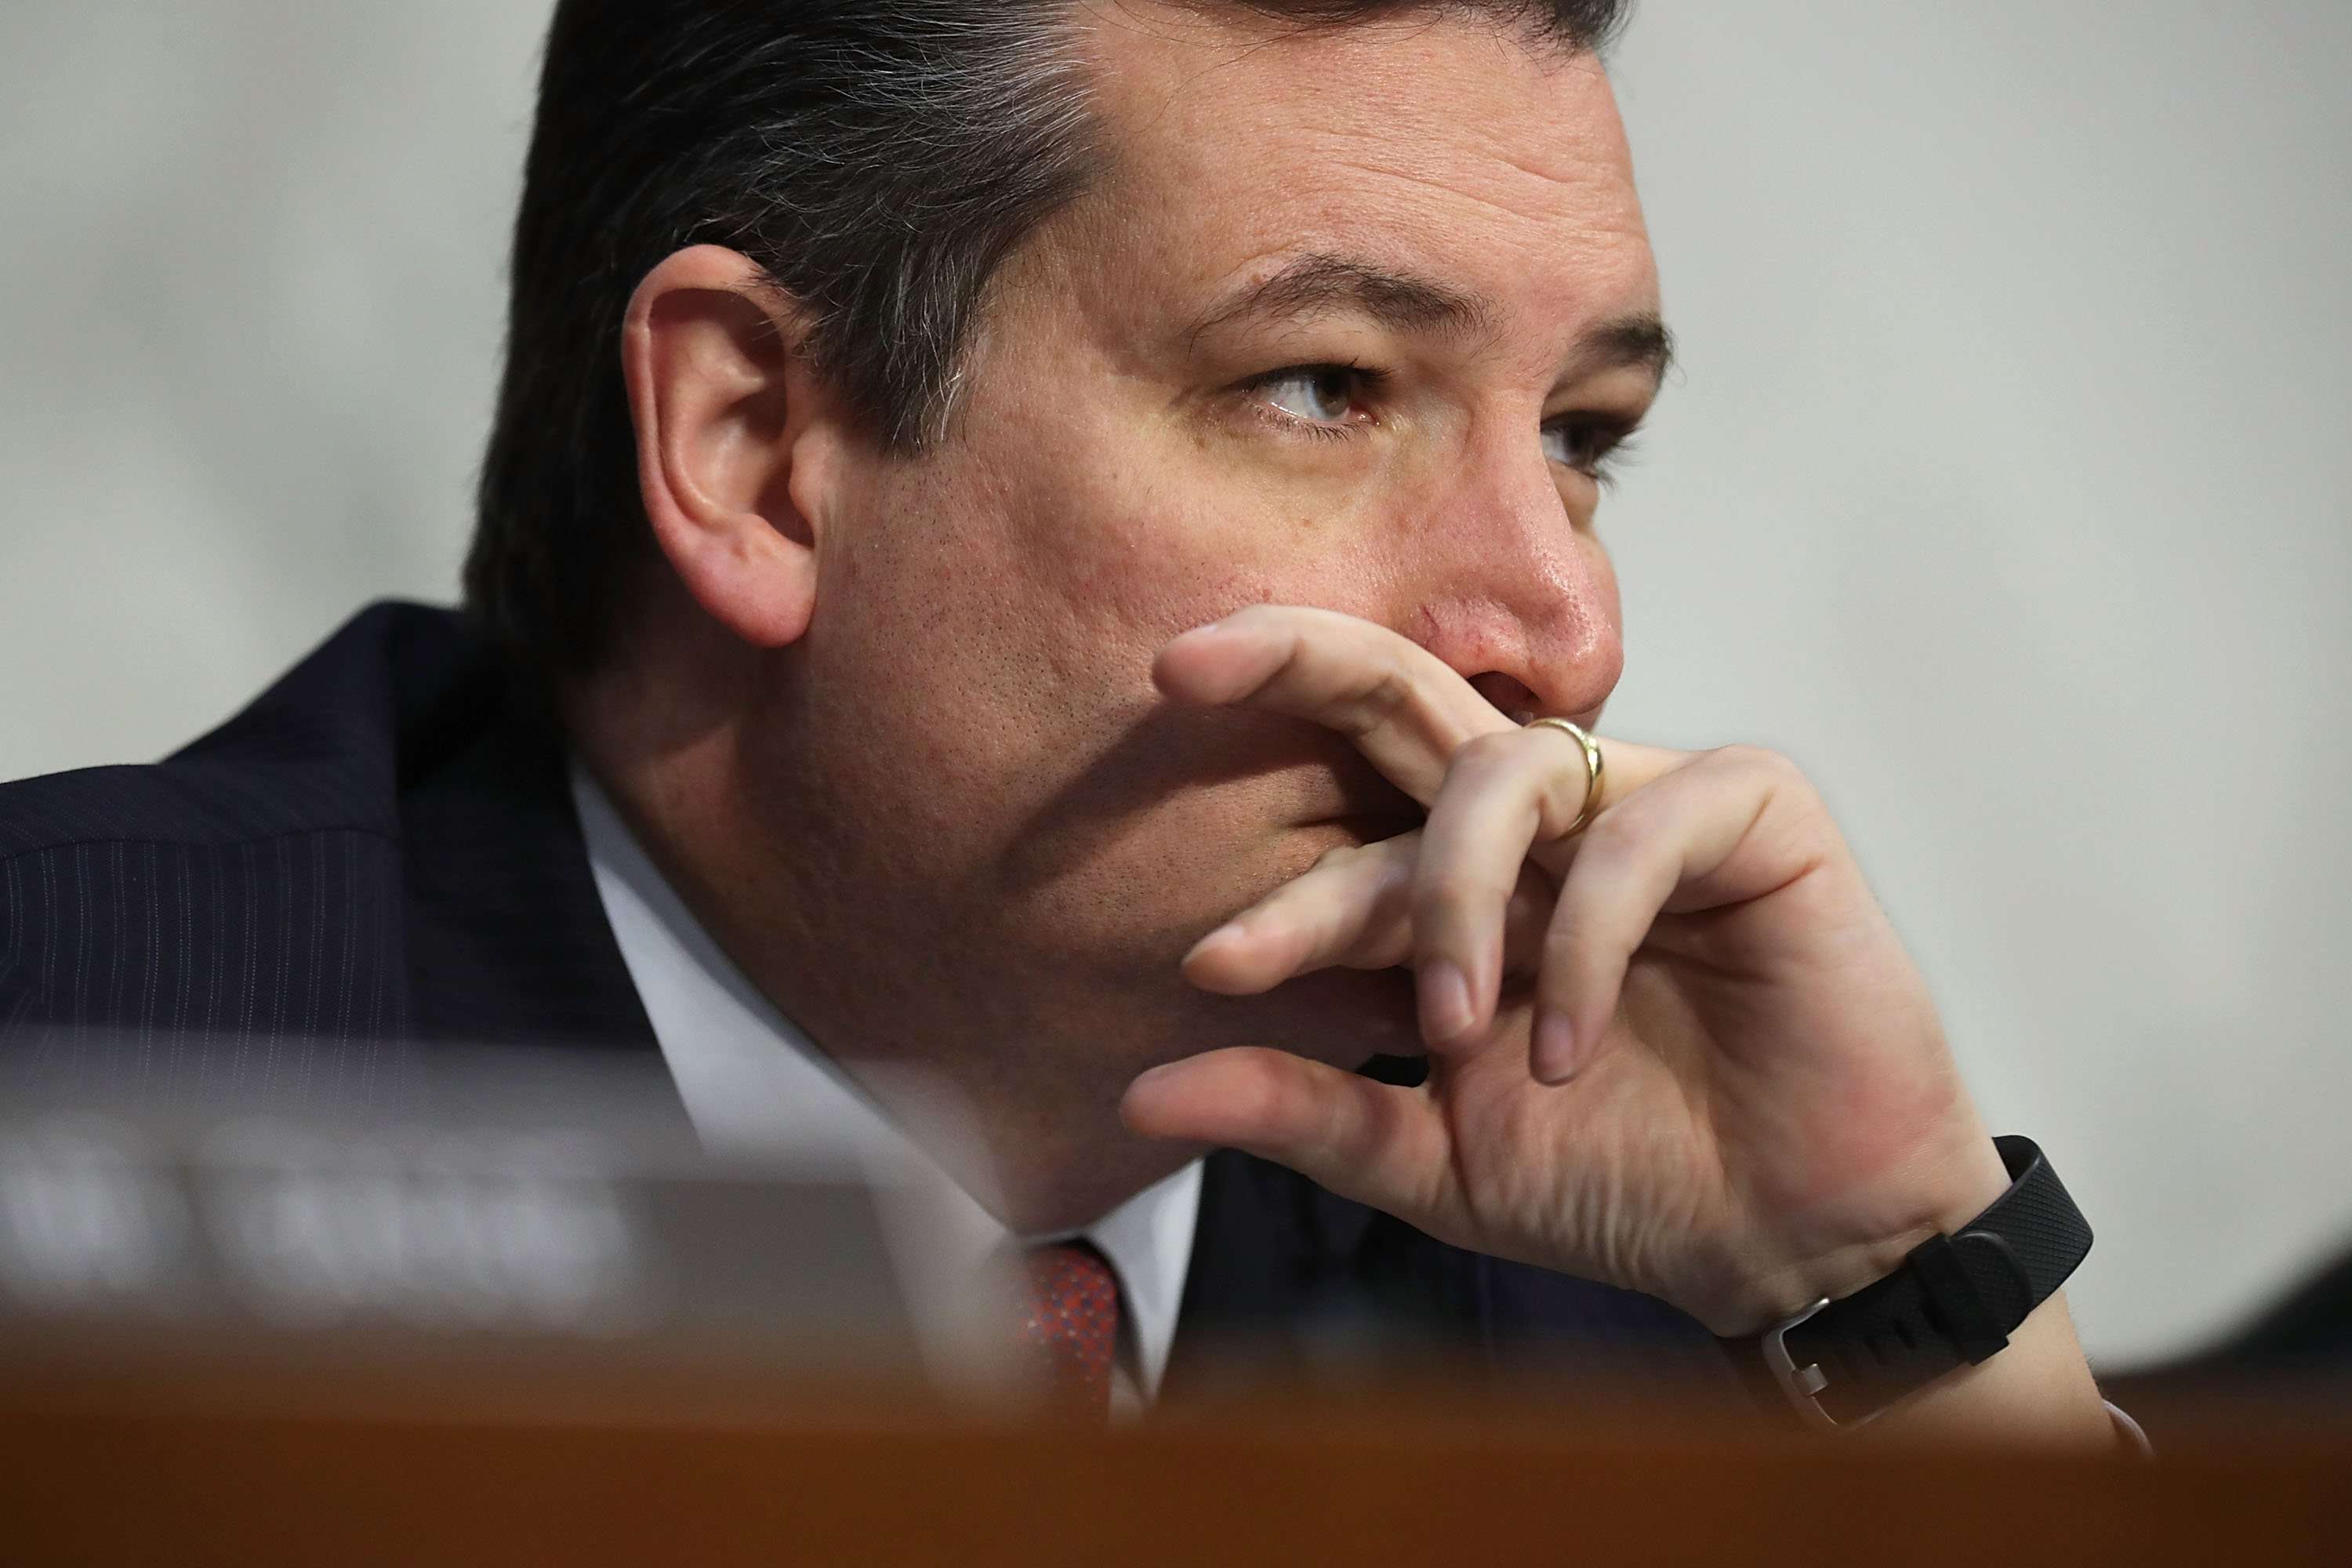 image for People Are Roasting Rafael “Ted” Cruz After He Criticized Opponent for Using a Latino Nickname